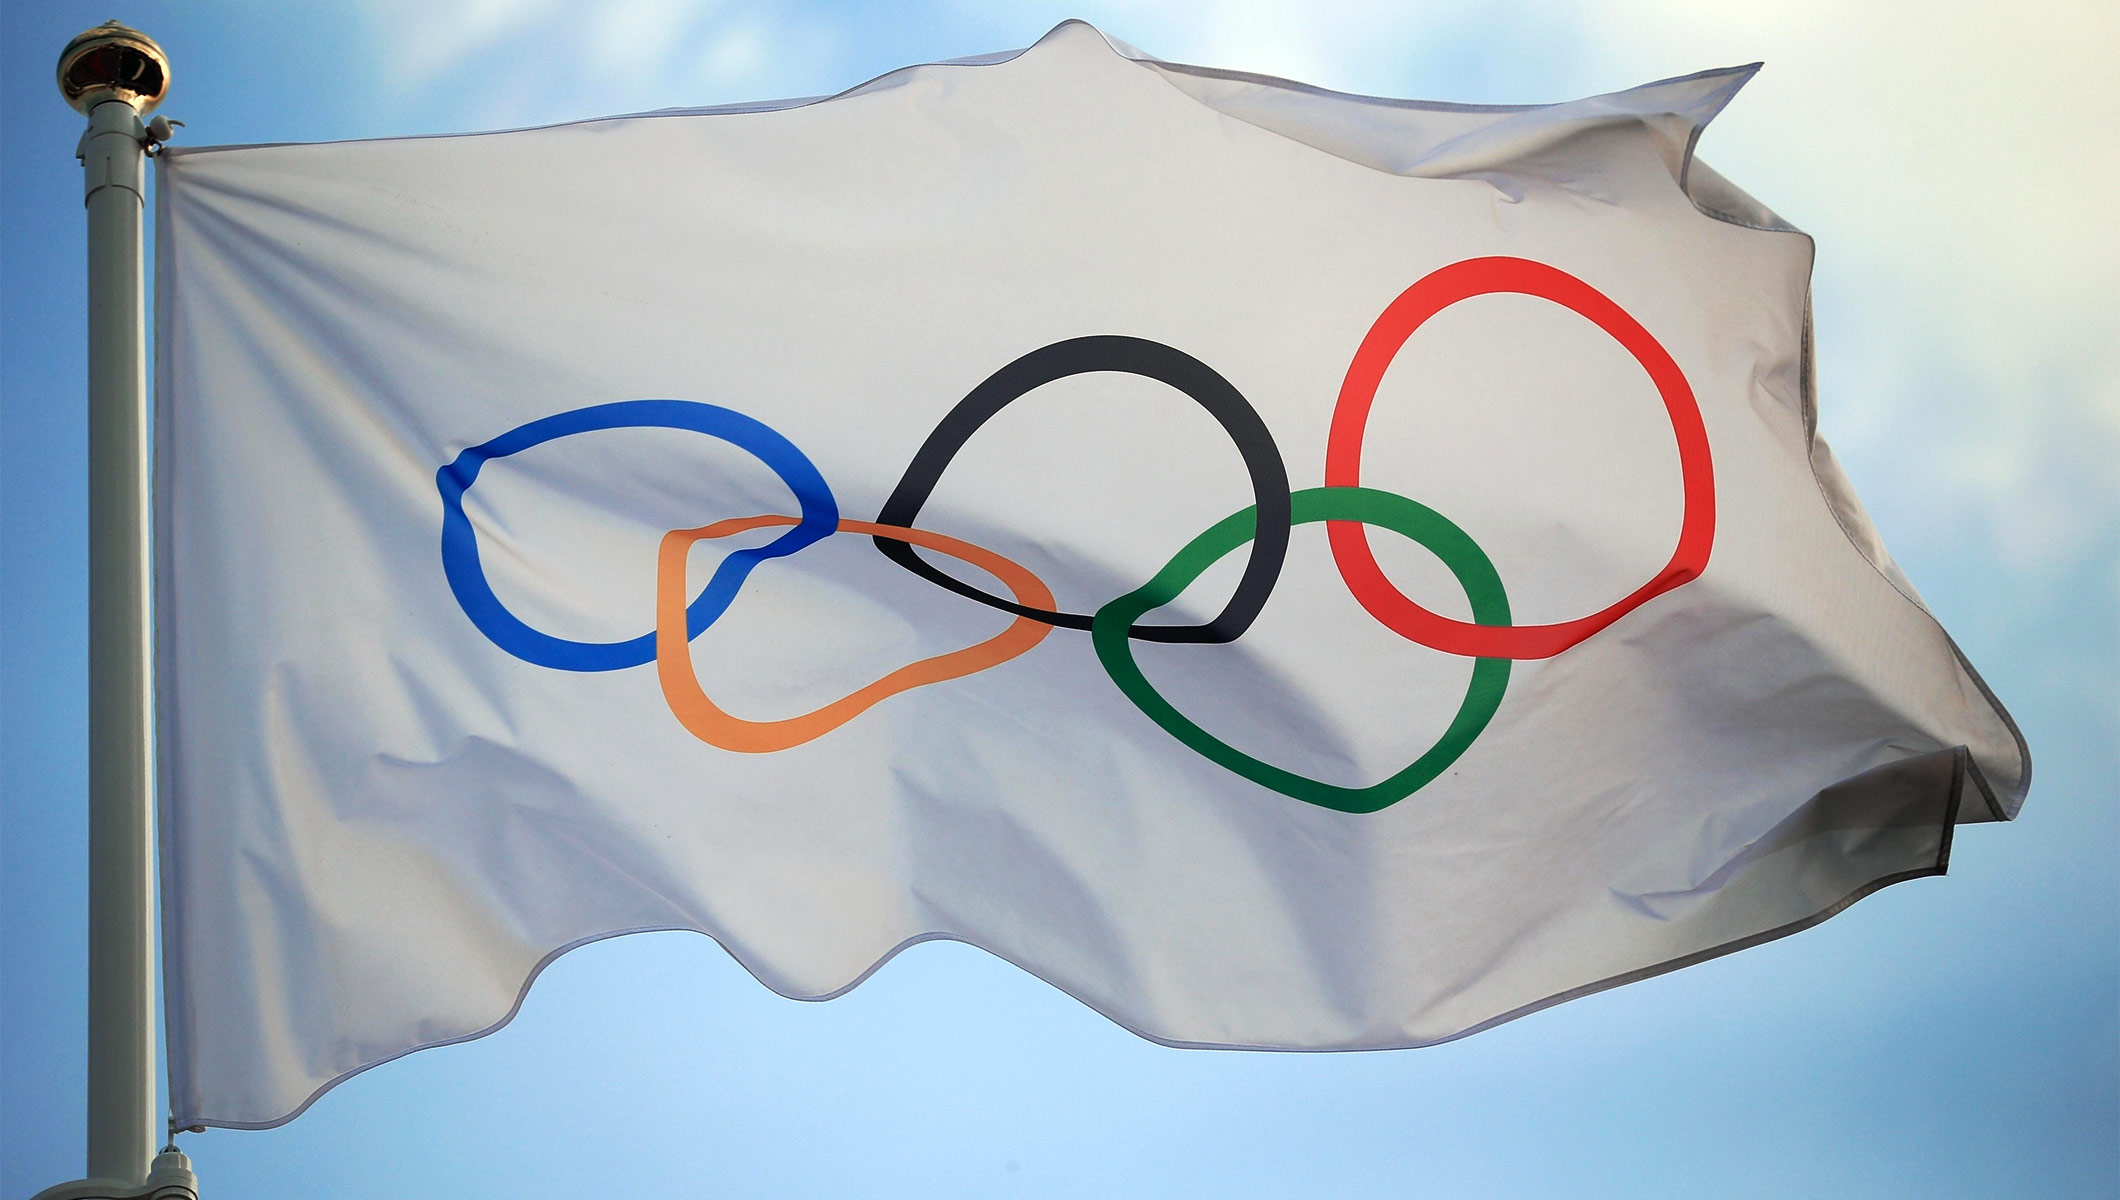 2022 Youth Olympic Games in Senegal postponed to 2026